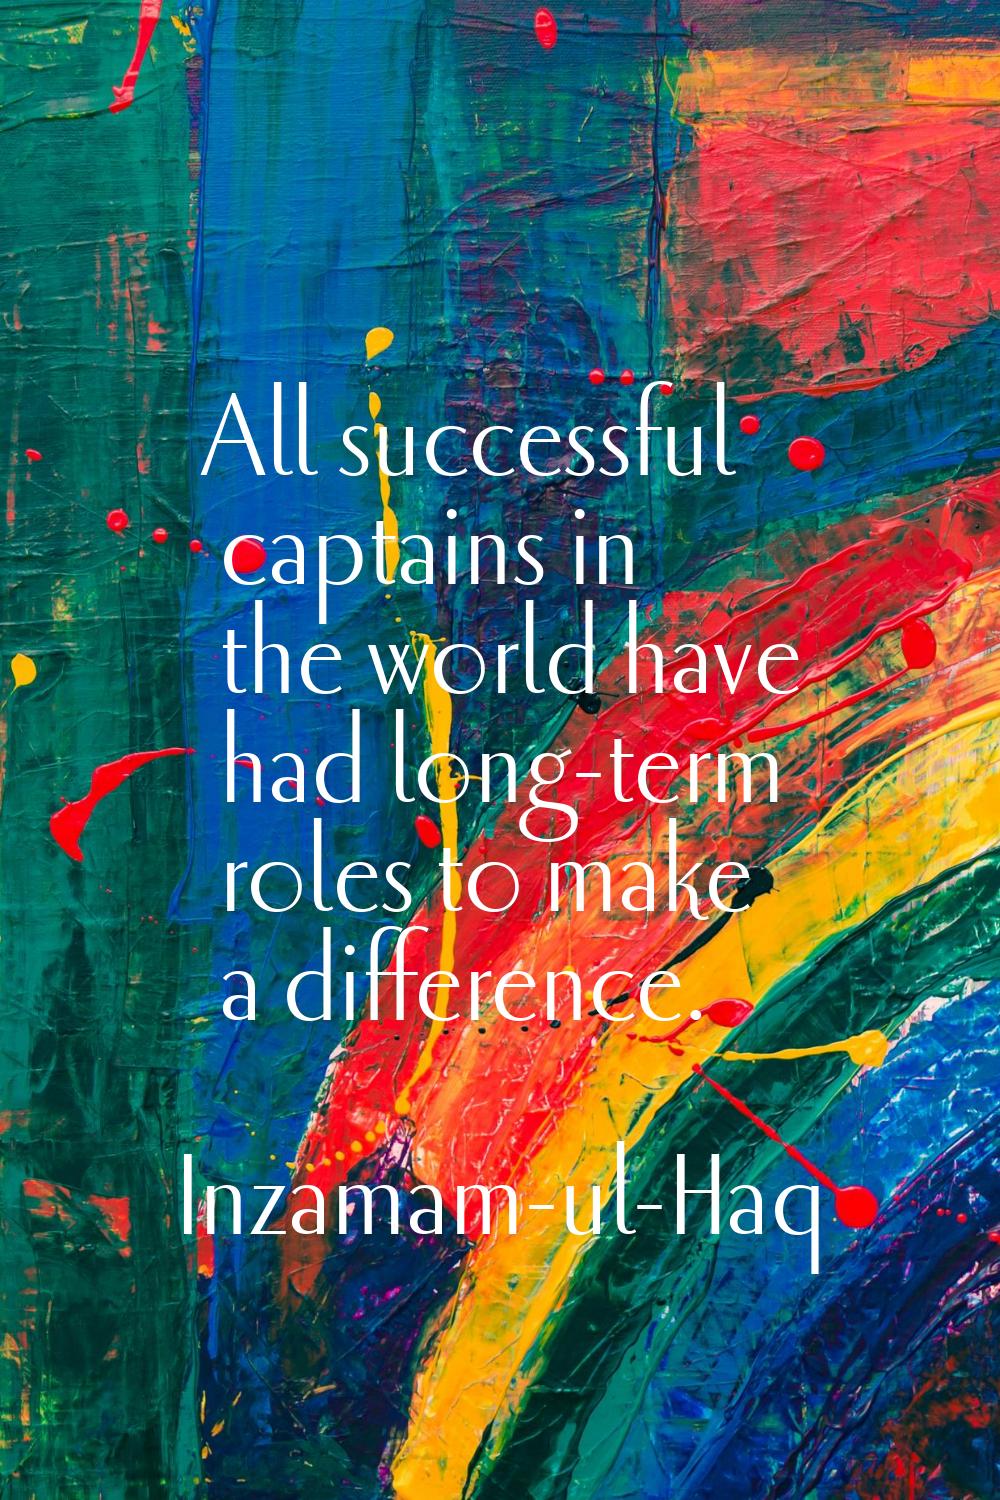 All successful captains in the world have had long-term roles to make a difference.